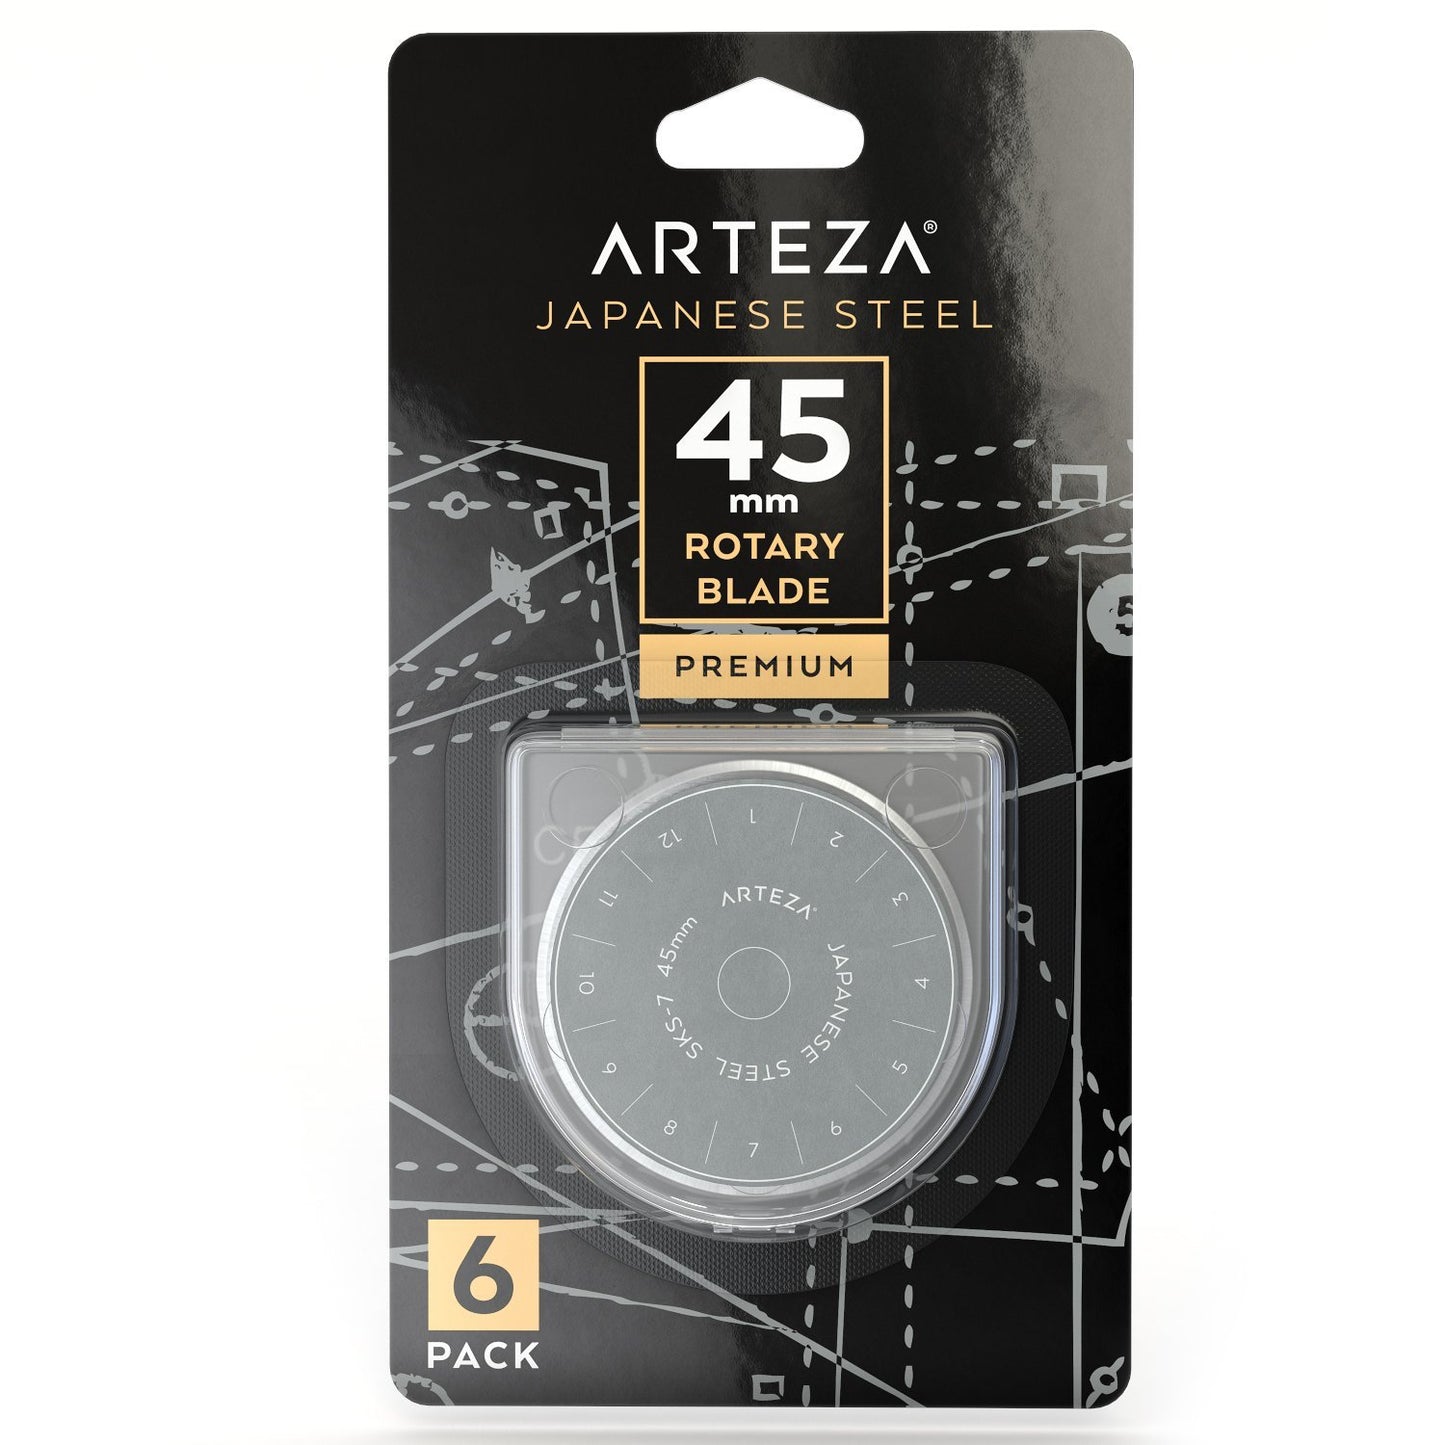 Arteza Rotary Cutter Blades, 45mm - Pack of 6